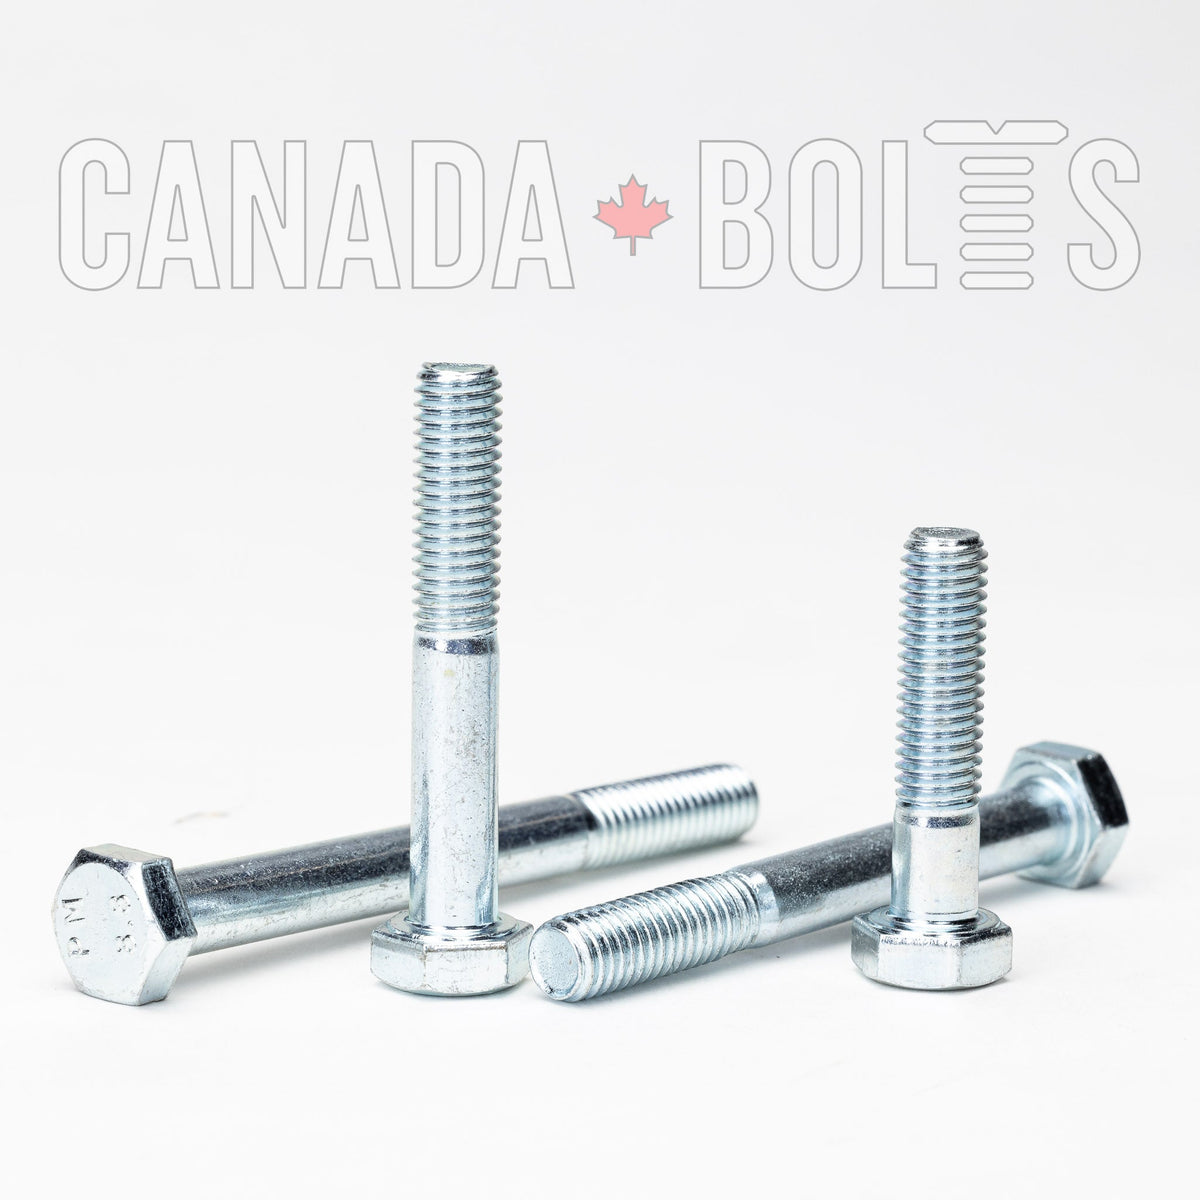 Hex Bolt M6 (6mm) x 20mm Stainless Steel SS SKU-15272  Ronical  Technologies LLP - Wide range of embedded electronics industrial  engineering products like device programmers and automation products